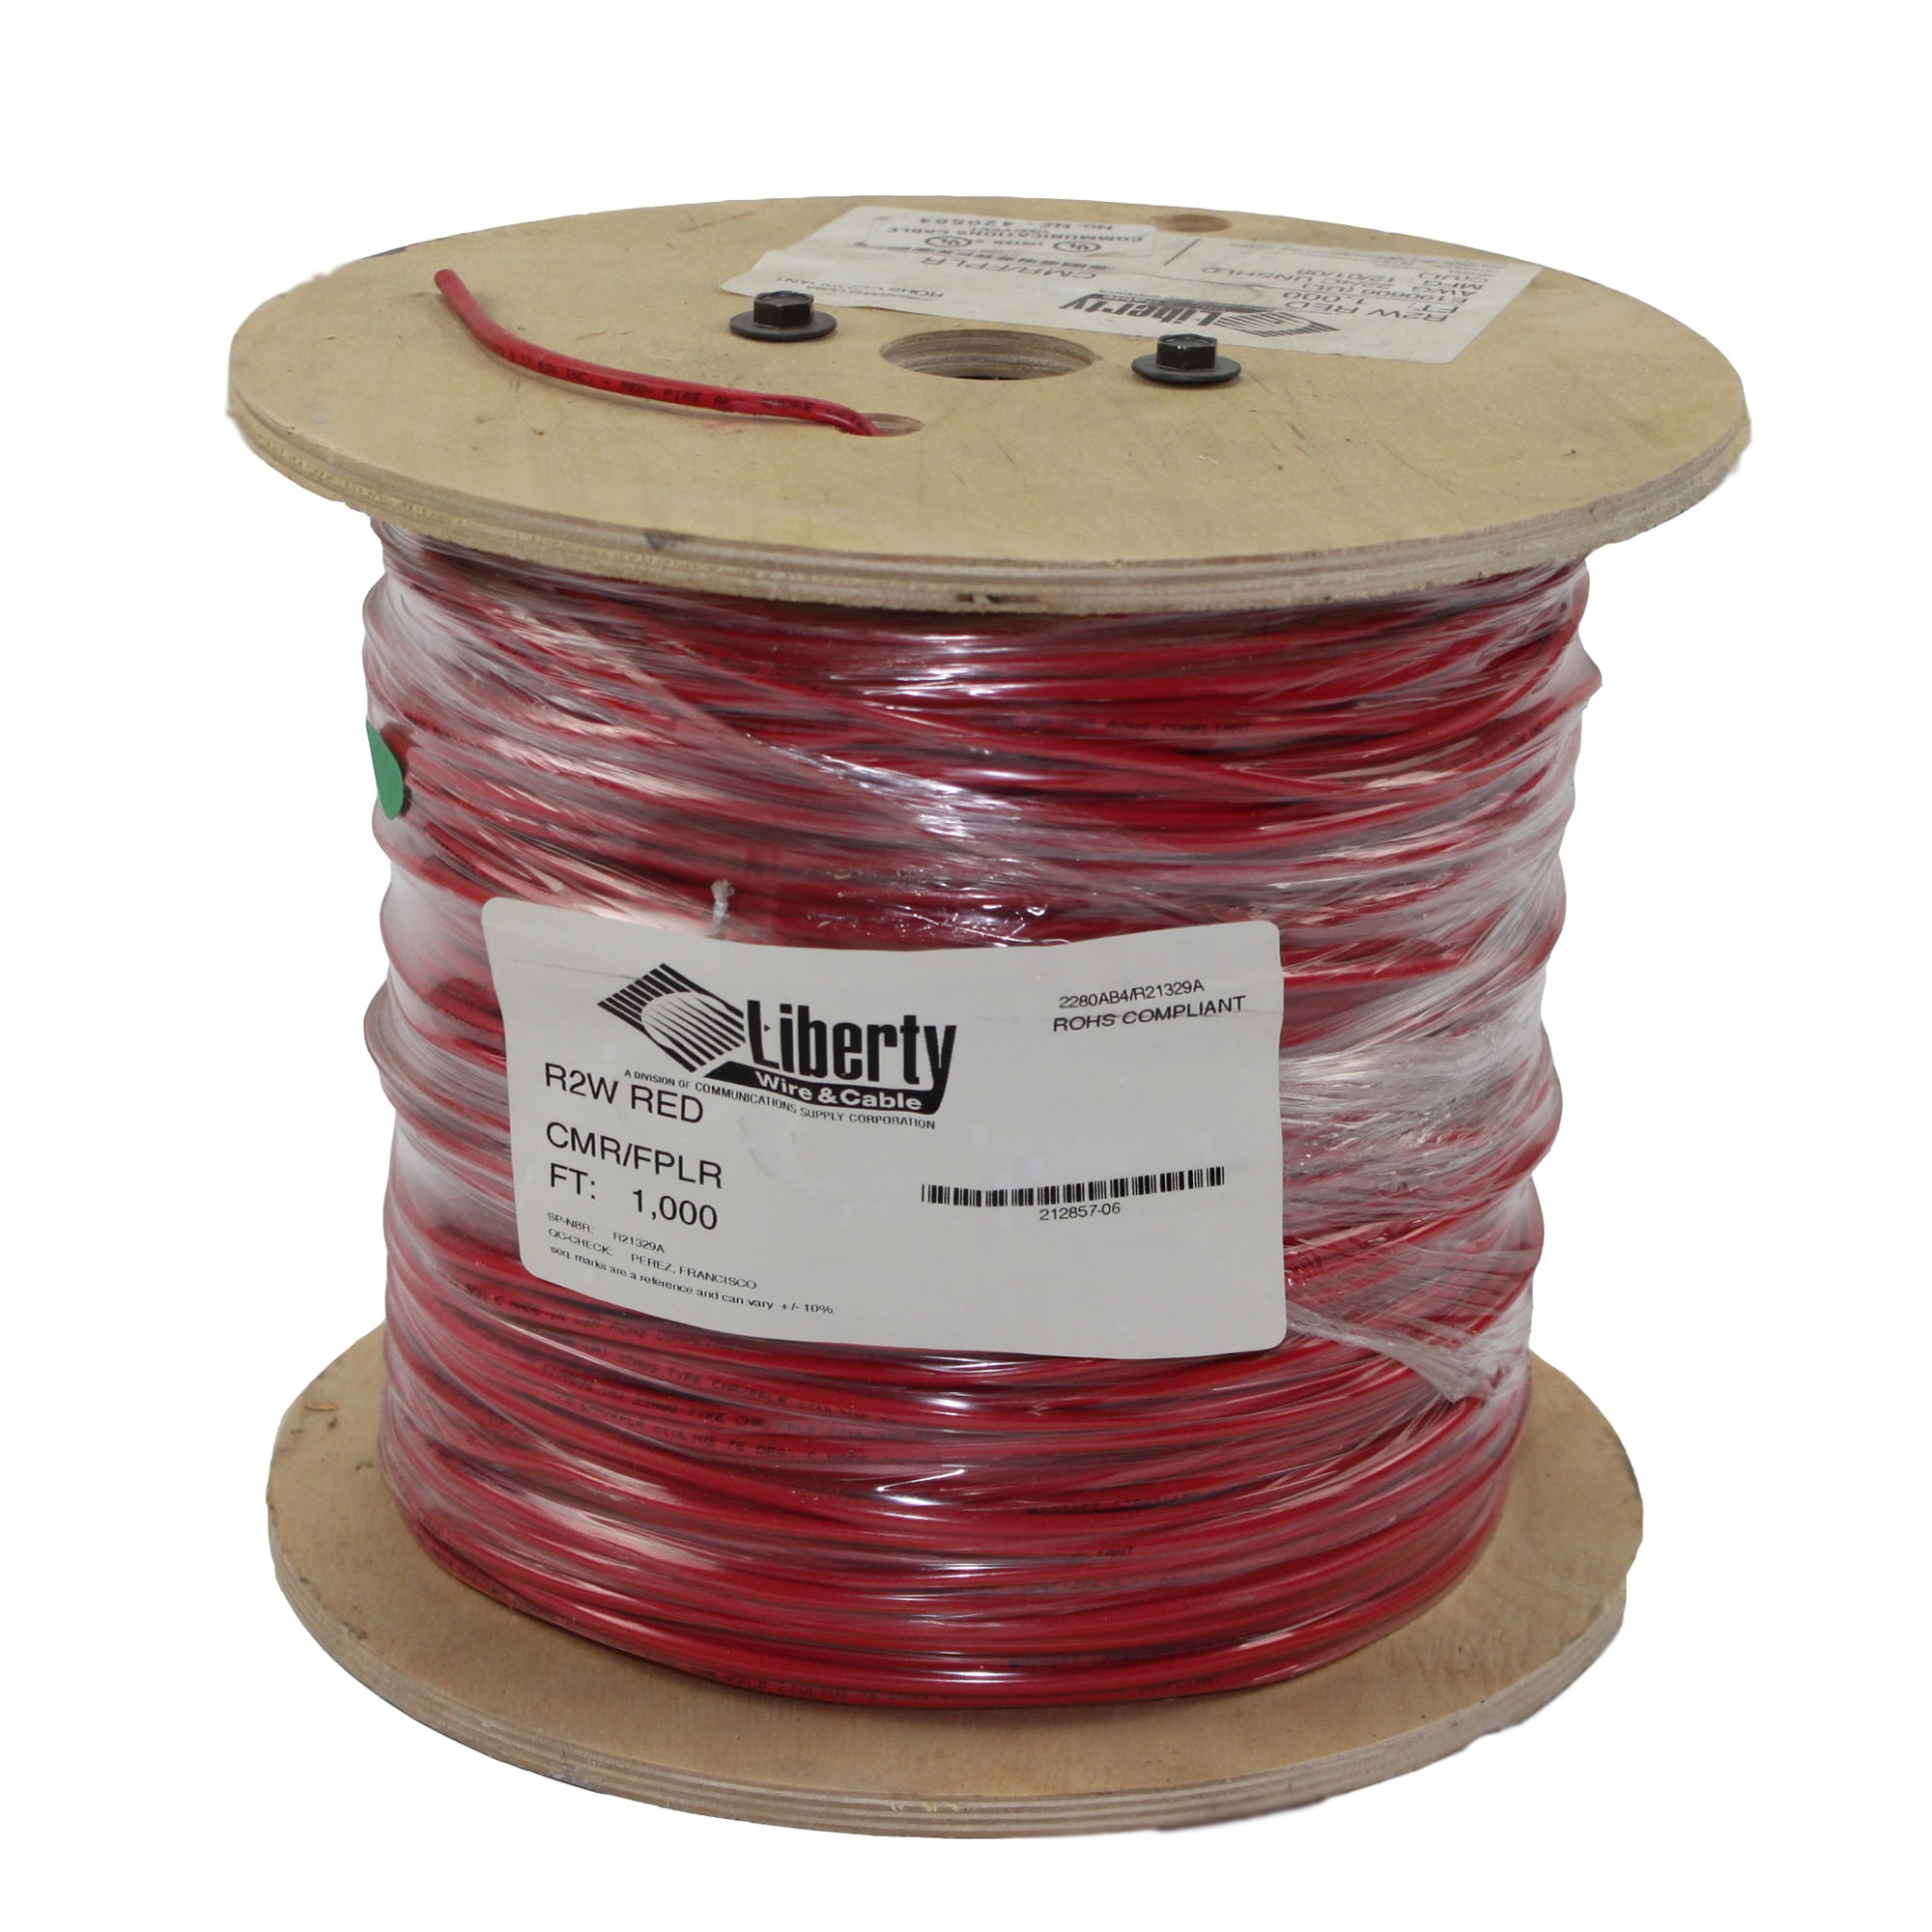 Solid CCS CCTV Bulk Coax Direct Burial Cable Spool Black 18AWG Syston 1000ft Quad Shield Outdoor RG-59/U 3.0 GHz